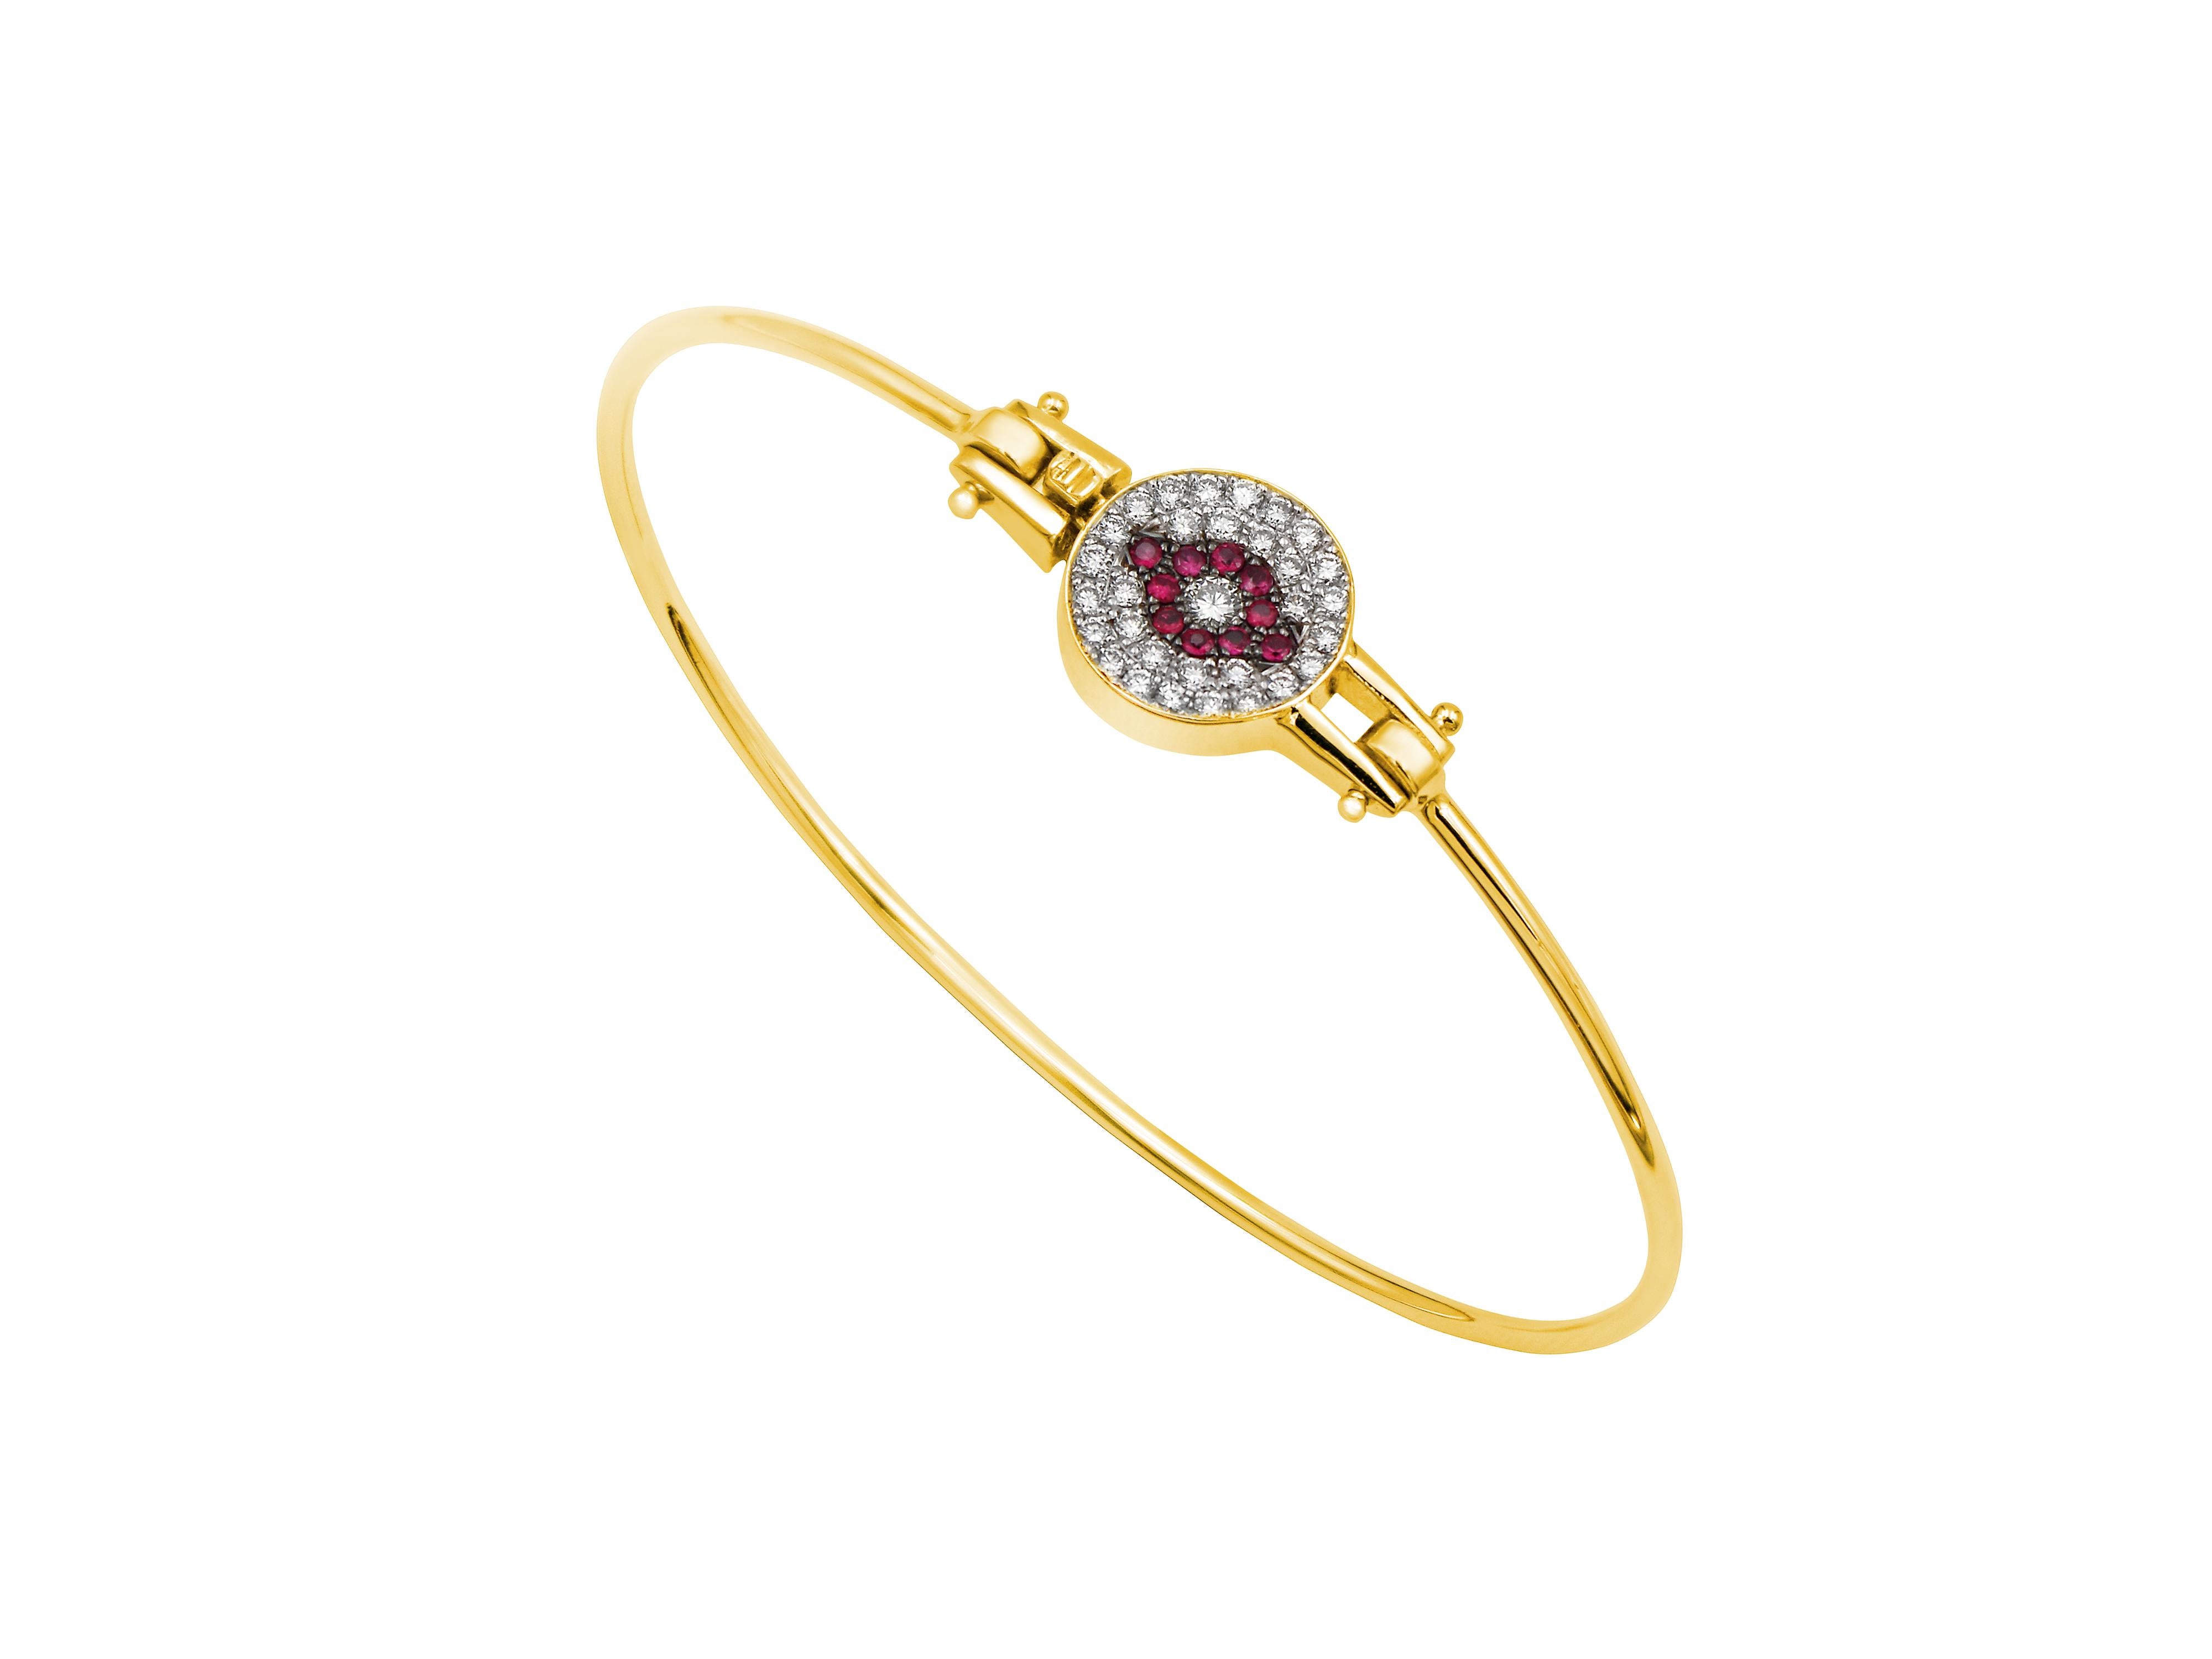 Brilliant Cut Dimos 18k White Gold Evil Eye Bangle Bracelet with Rubies and Diamonds For Sale